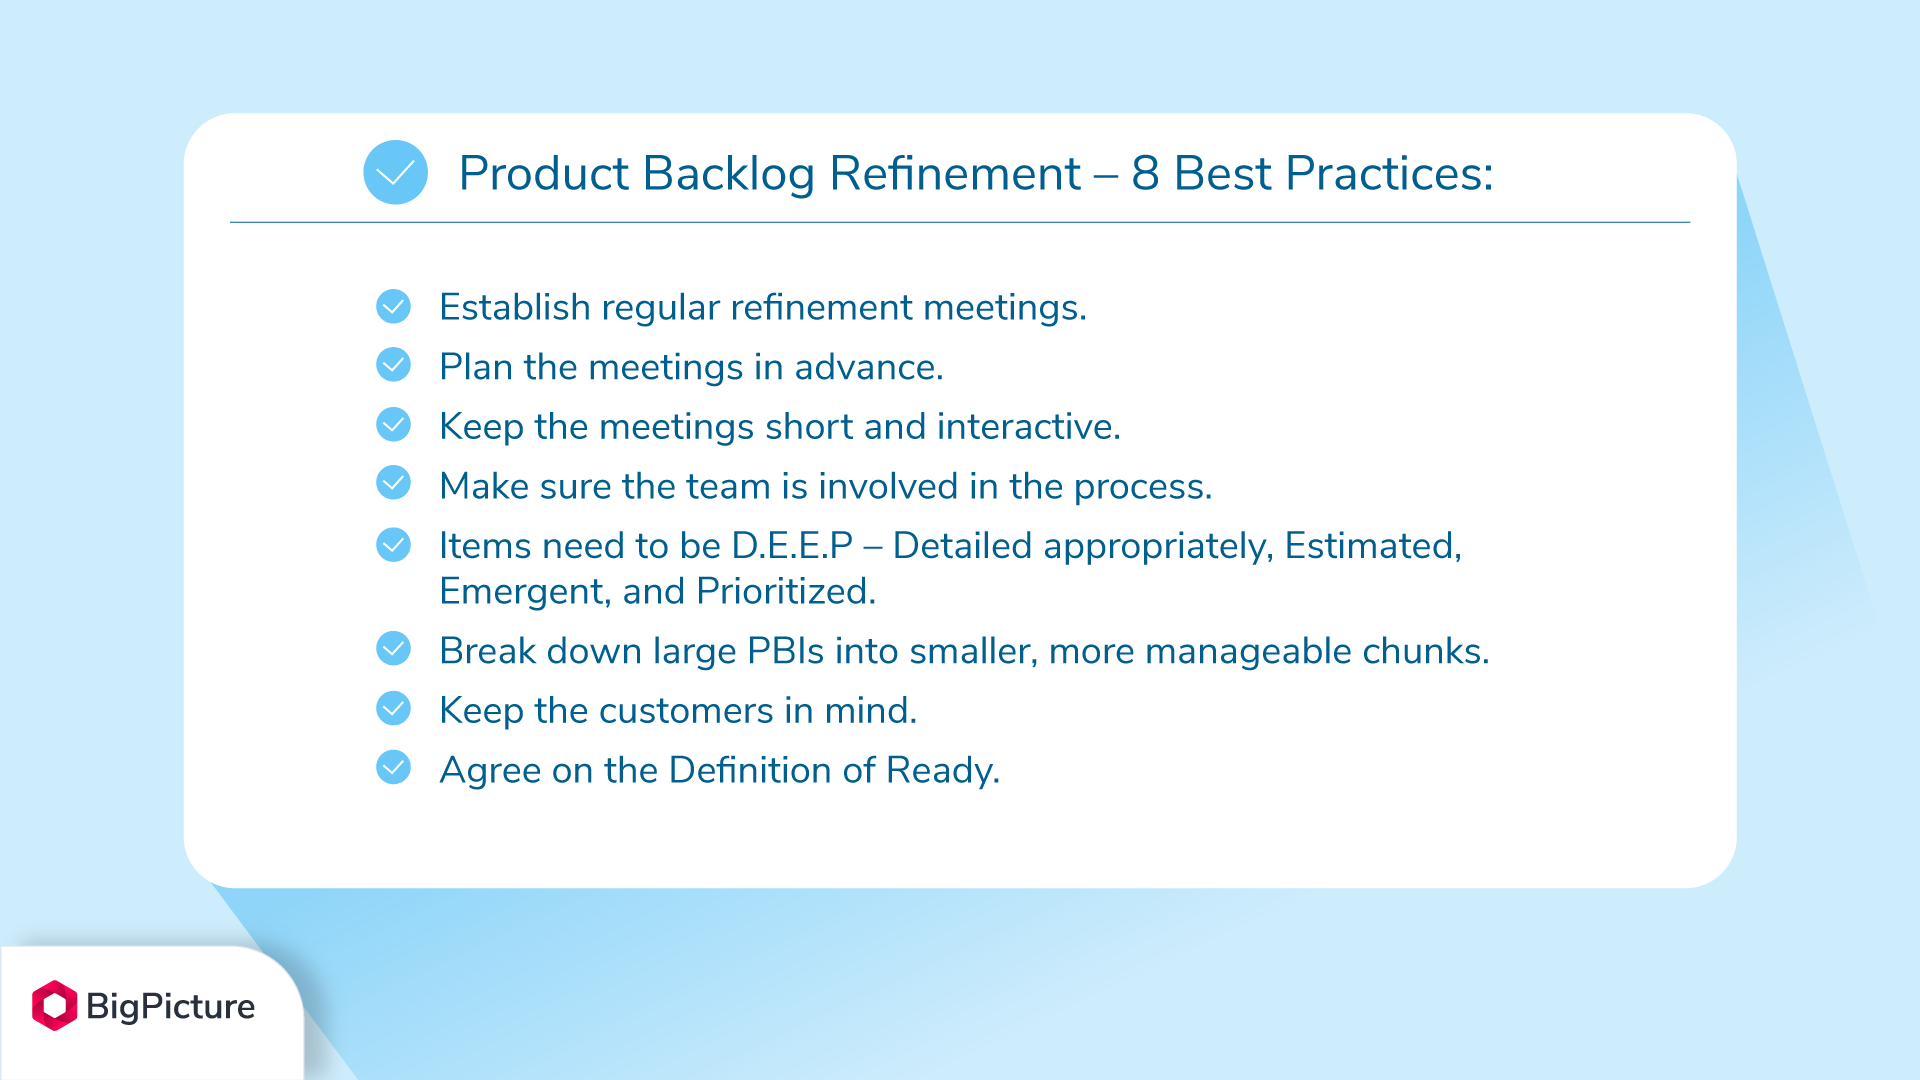 A list of best practices for product backlog refinement